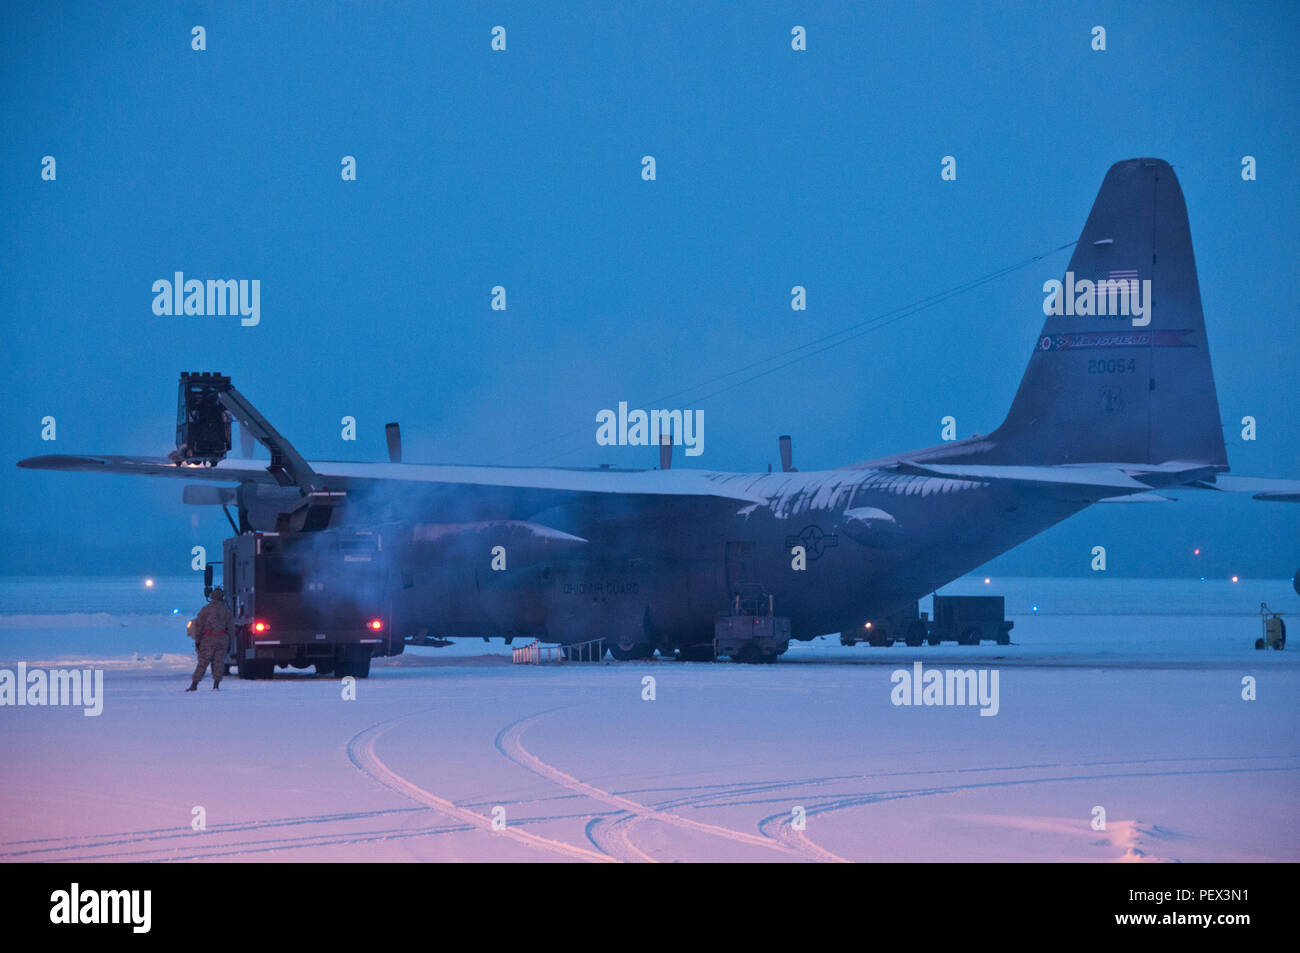 Ohio Air National Guard members work early morning,  Feb. 16, 2016, to remove snow from the flightline and fleet of C-130H Hercules at the 179th Airlift Wing, Mansfield, Ohio. The Ohio Air National Guard unit is always on mission to respond with highly qualified citizen-airmen to execute Federal, State and community missions. (U.S. Air National Guard photo by Tech. Sgt. Joe Harwood/Released) Stock Photo